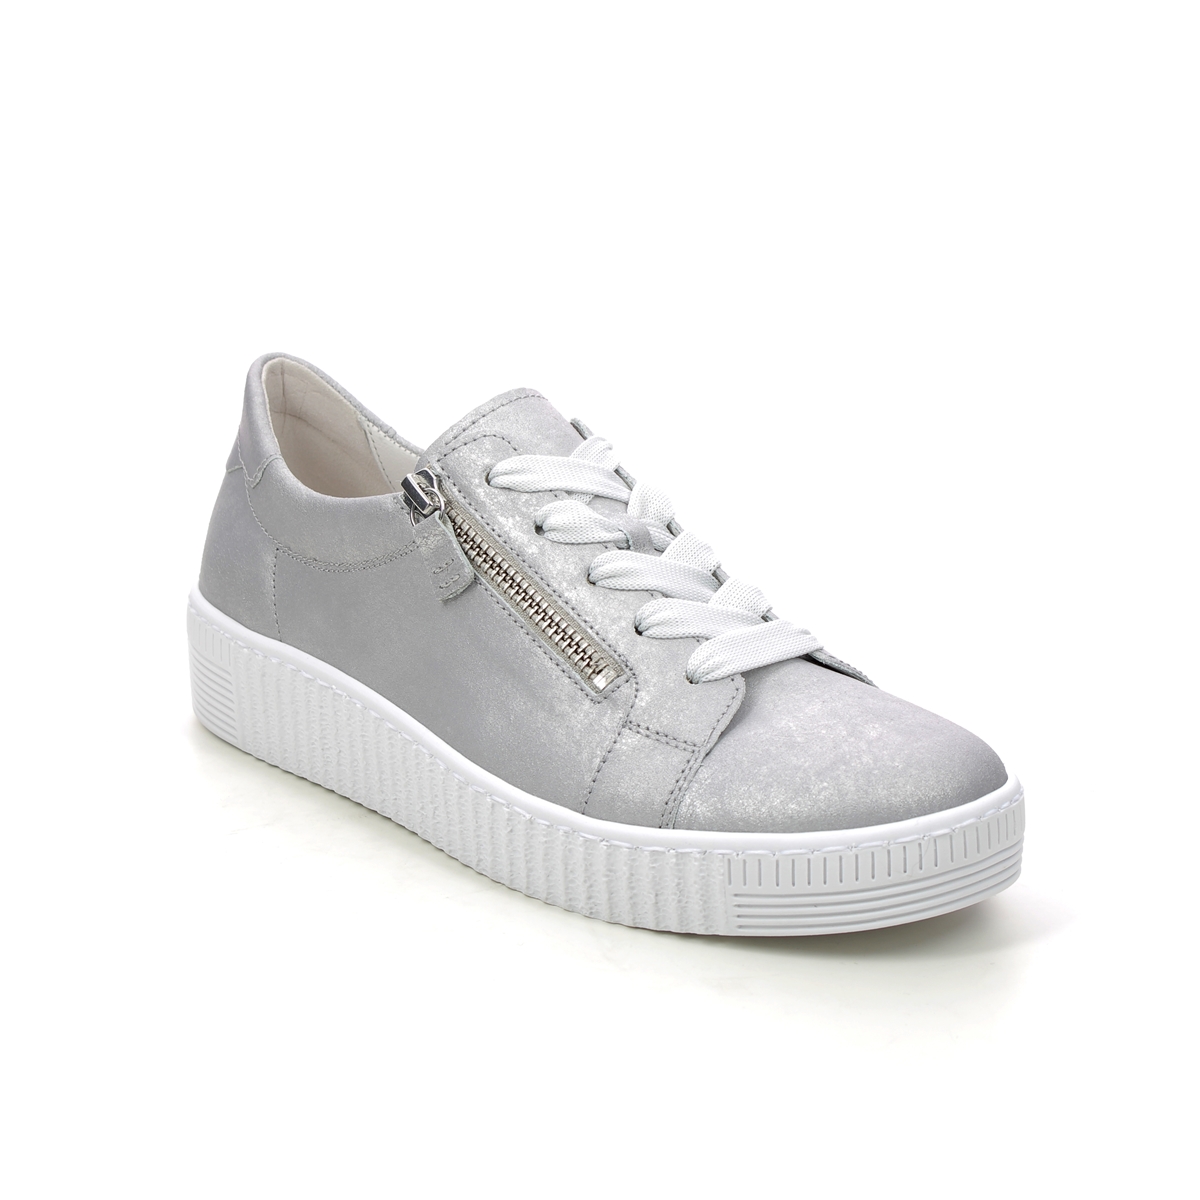 Gabor Wisdom Silver Womens trainers 43.334.61 in a Plain Leather in Size 7